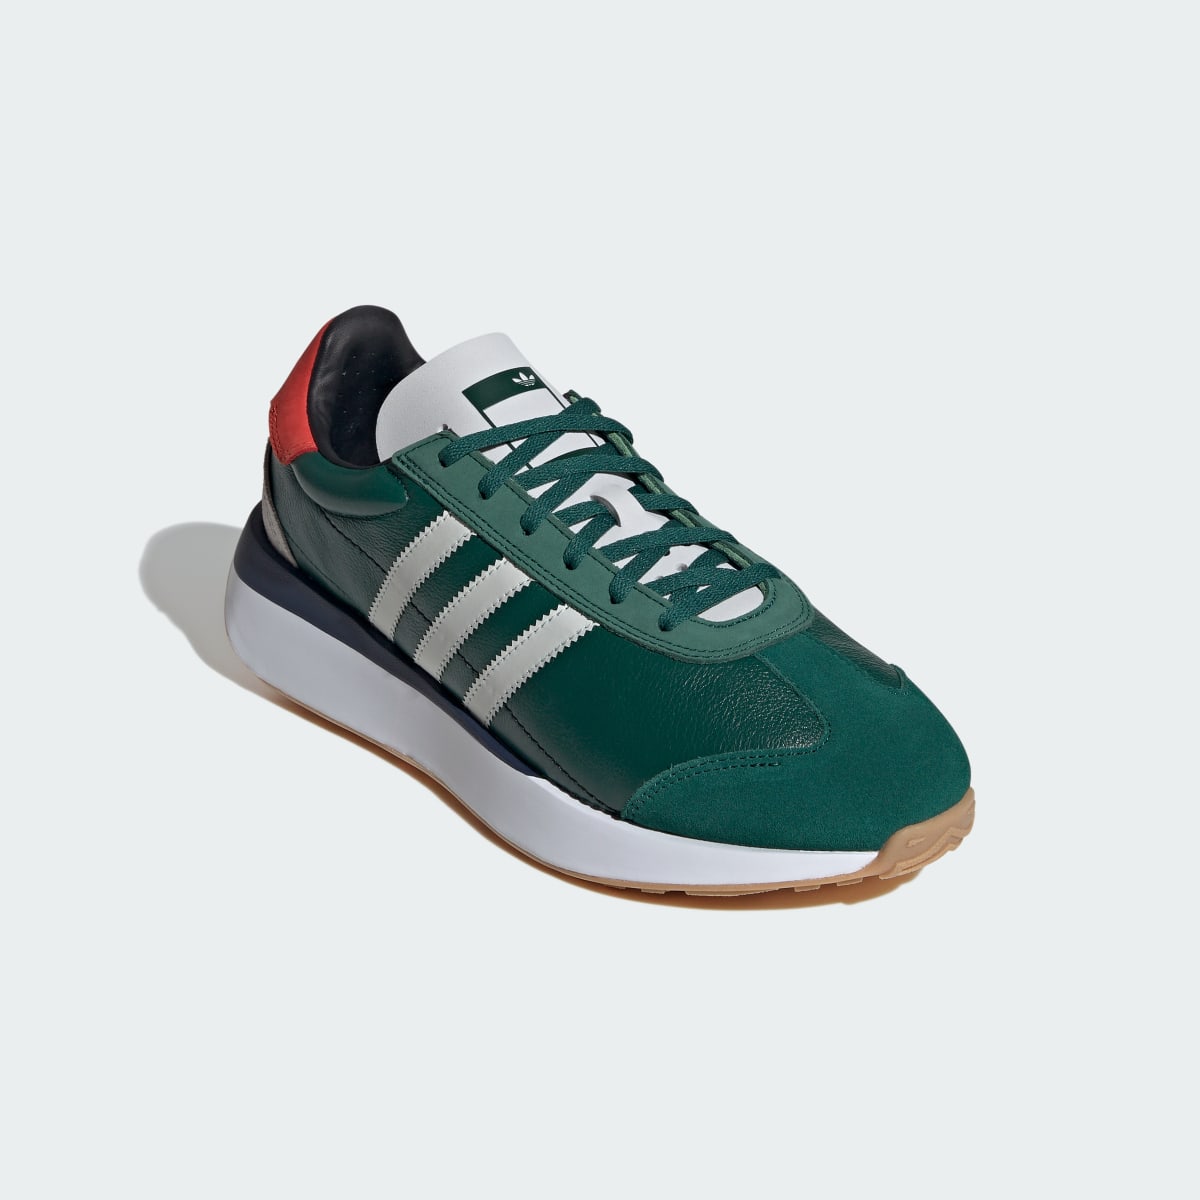 Adidas Sapatilhas Country XLG. 5